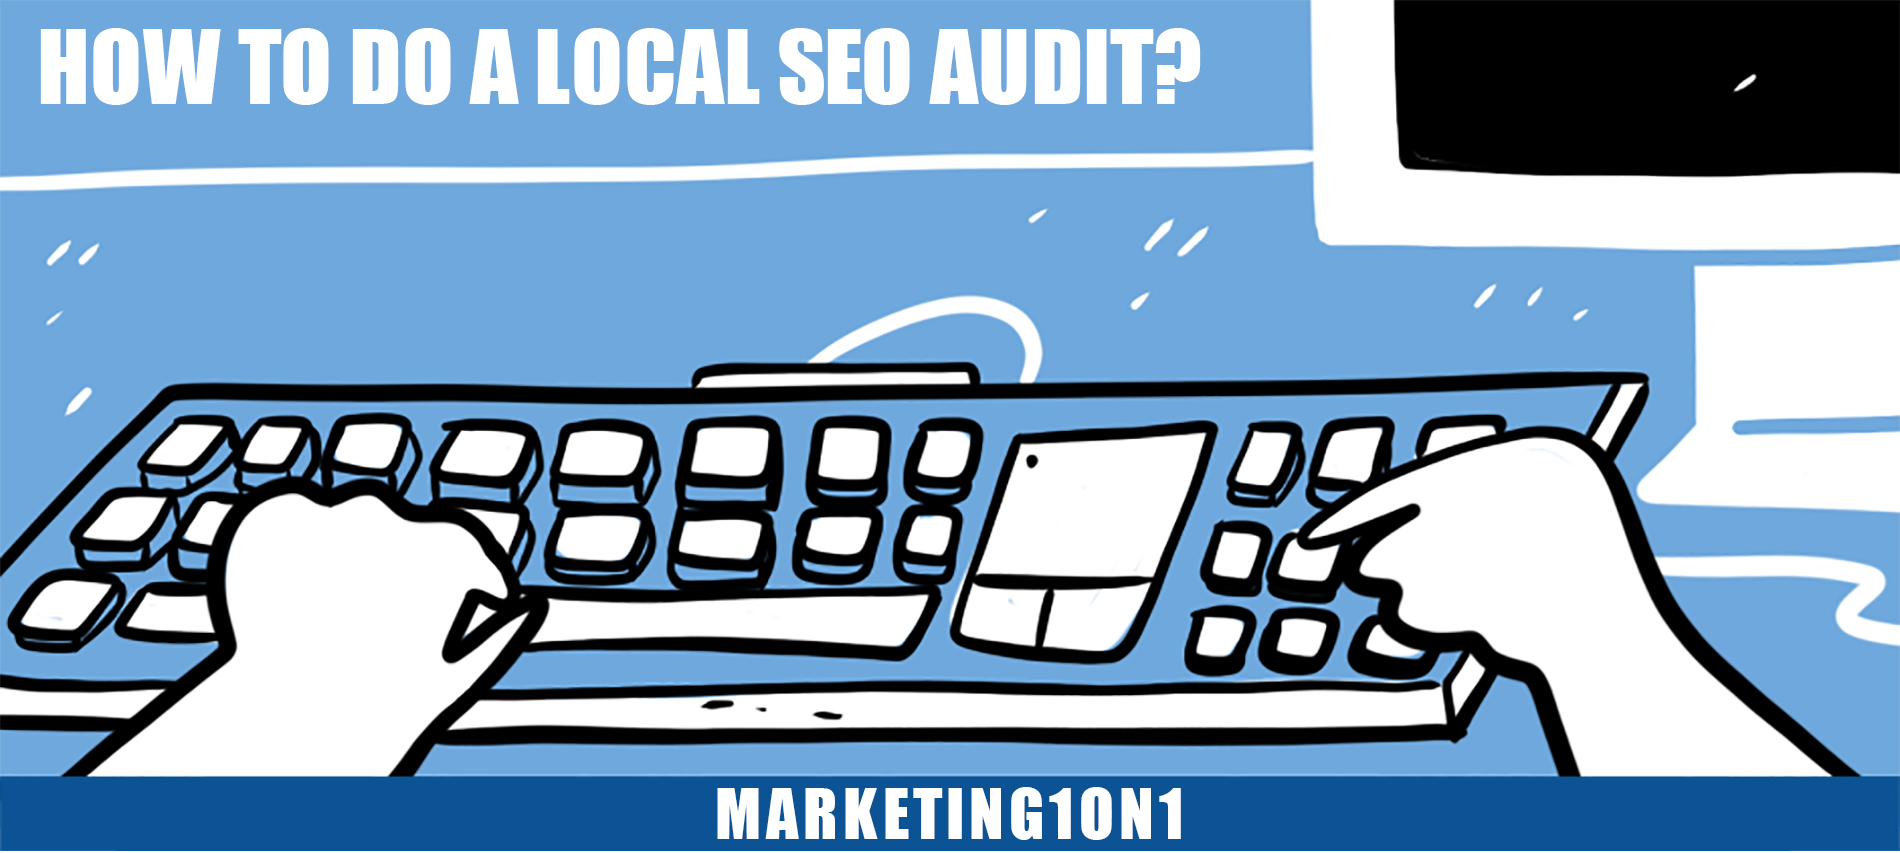 How to do a local SEO audit?